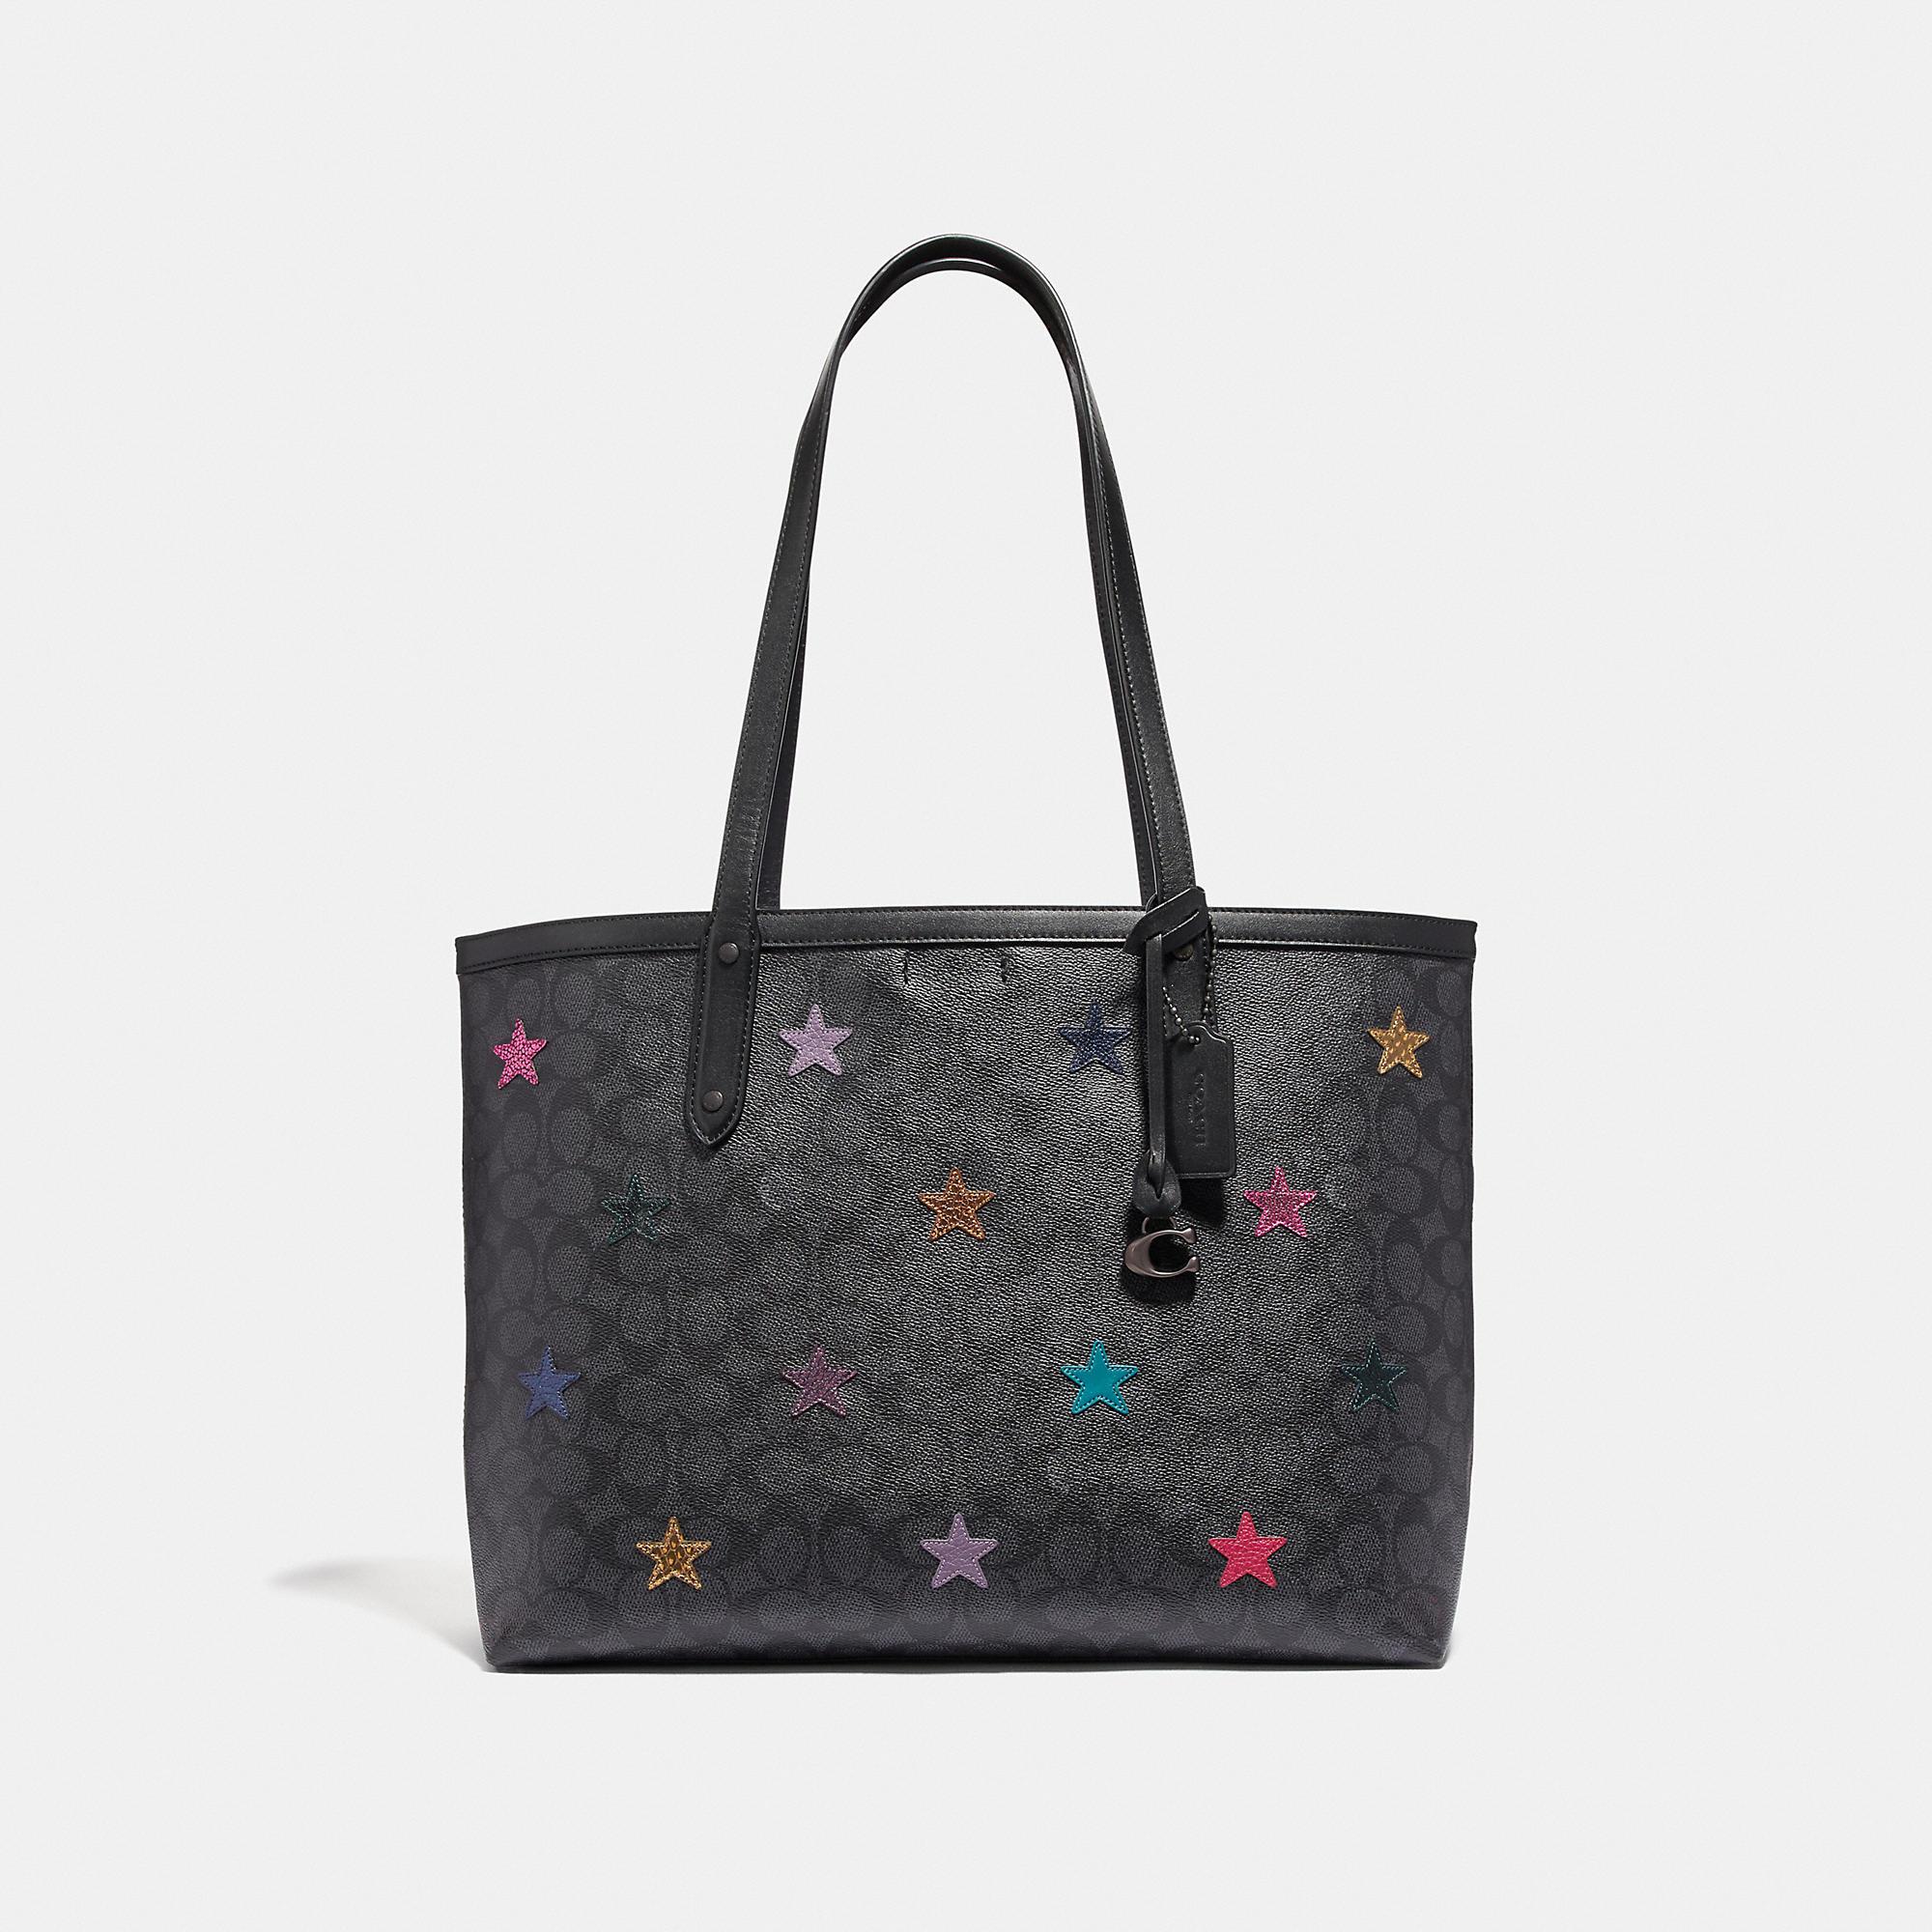 COACH Central Tote In Signature Canvas With Star Applique And 